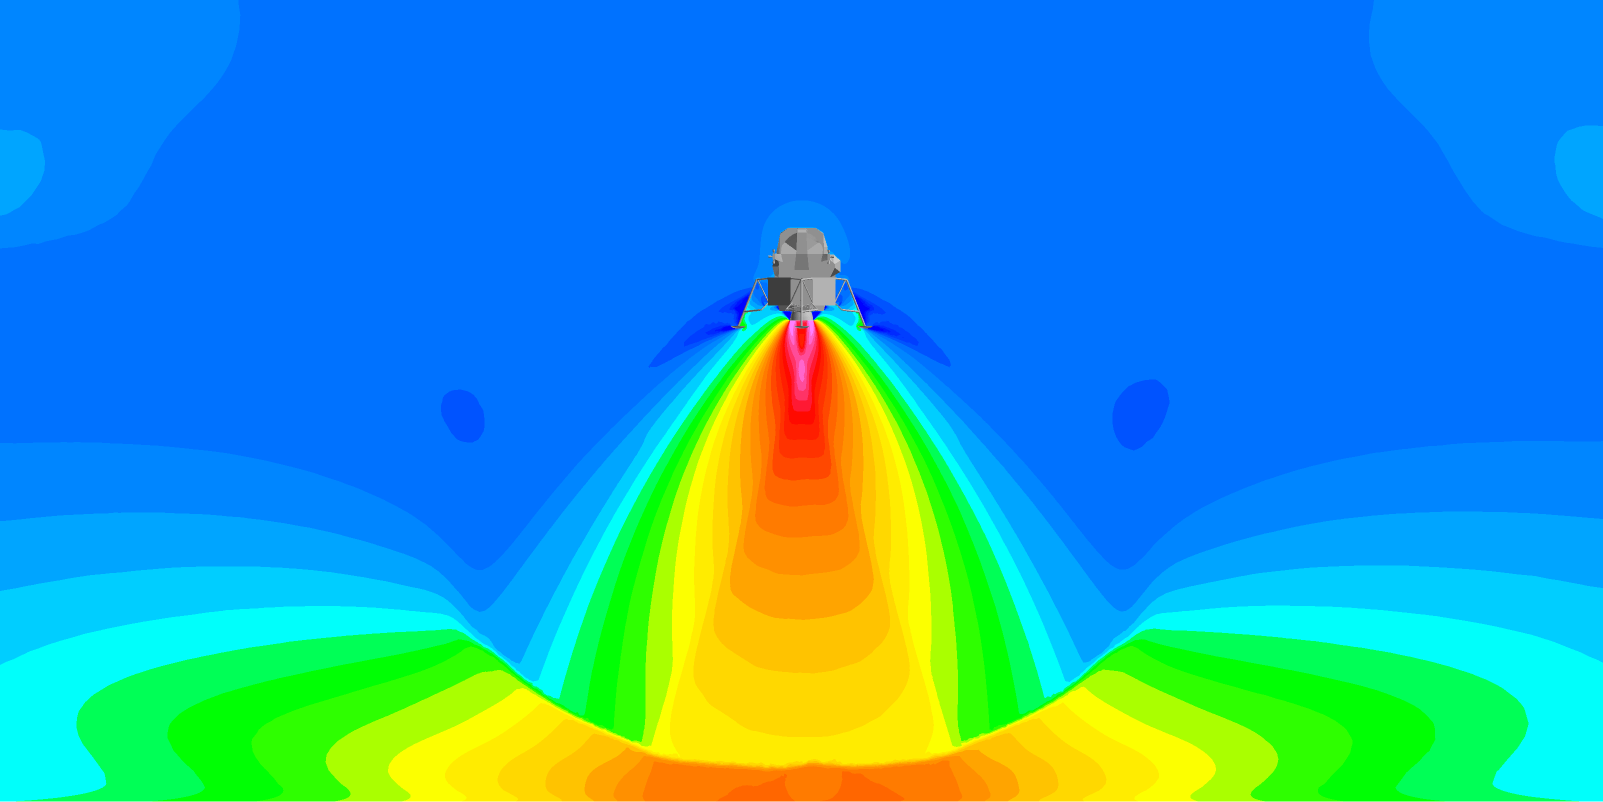 Plume gas density on a logarithmic scale indicating the large plume expansion envelope in a vacuum background.